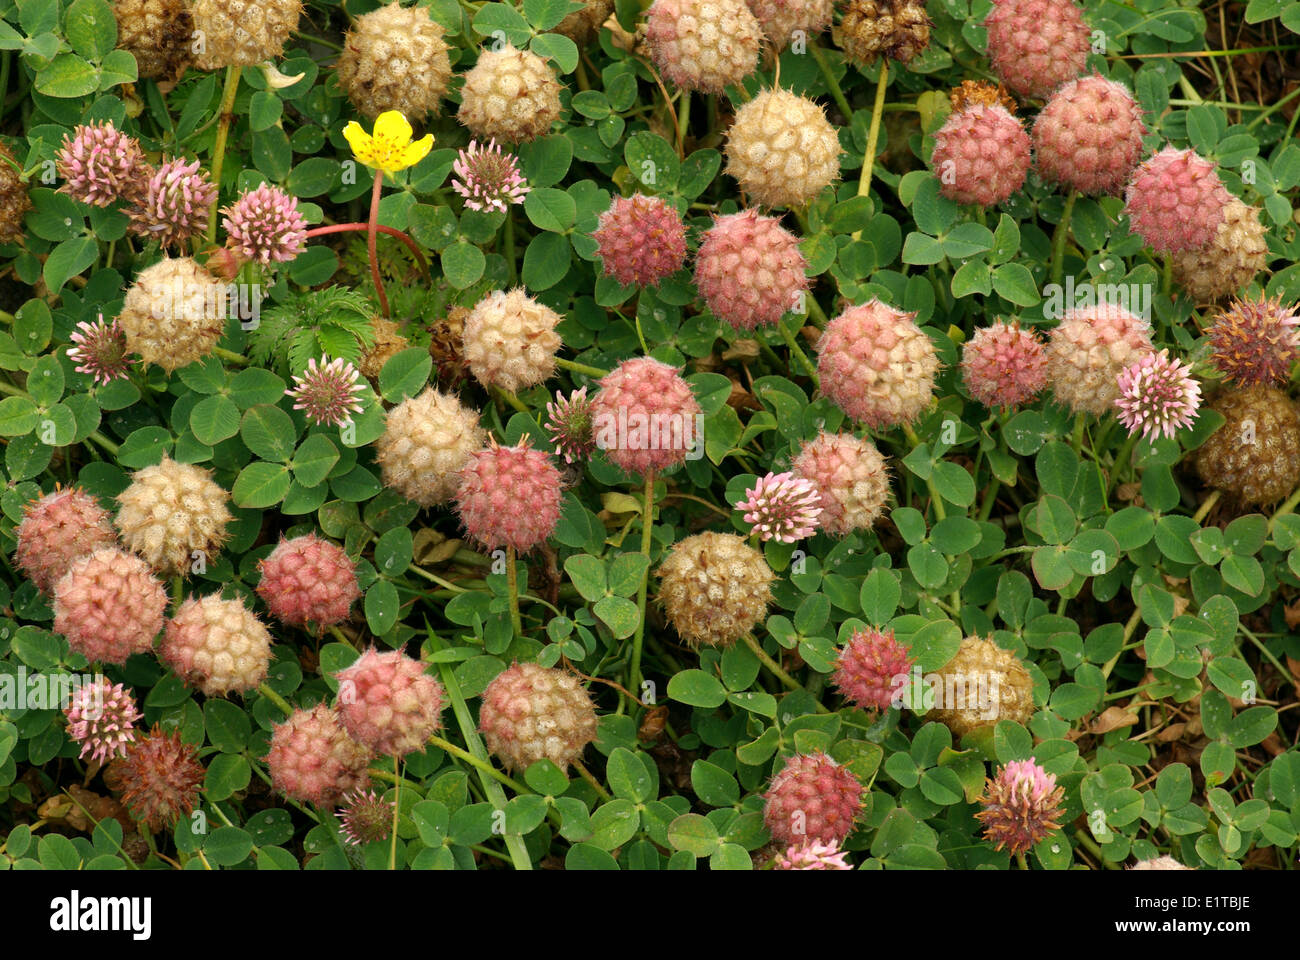 Close-up of the fruit of Strawberry Clover Stock Photo